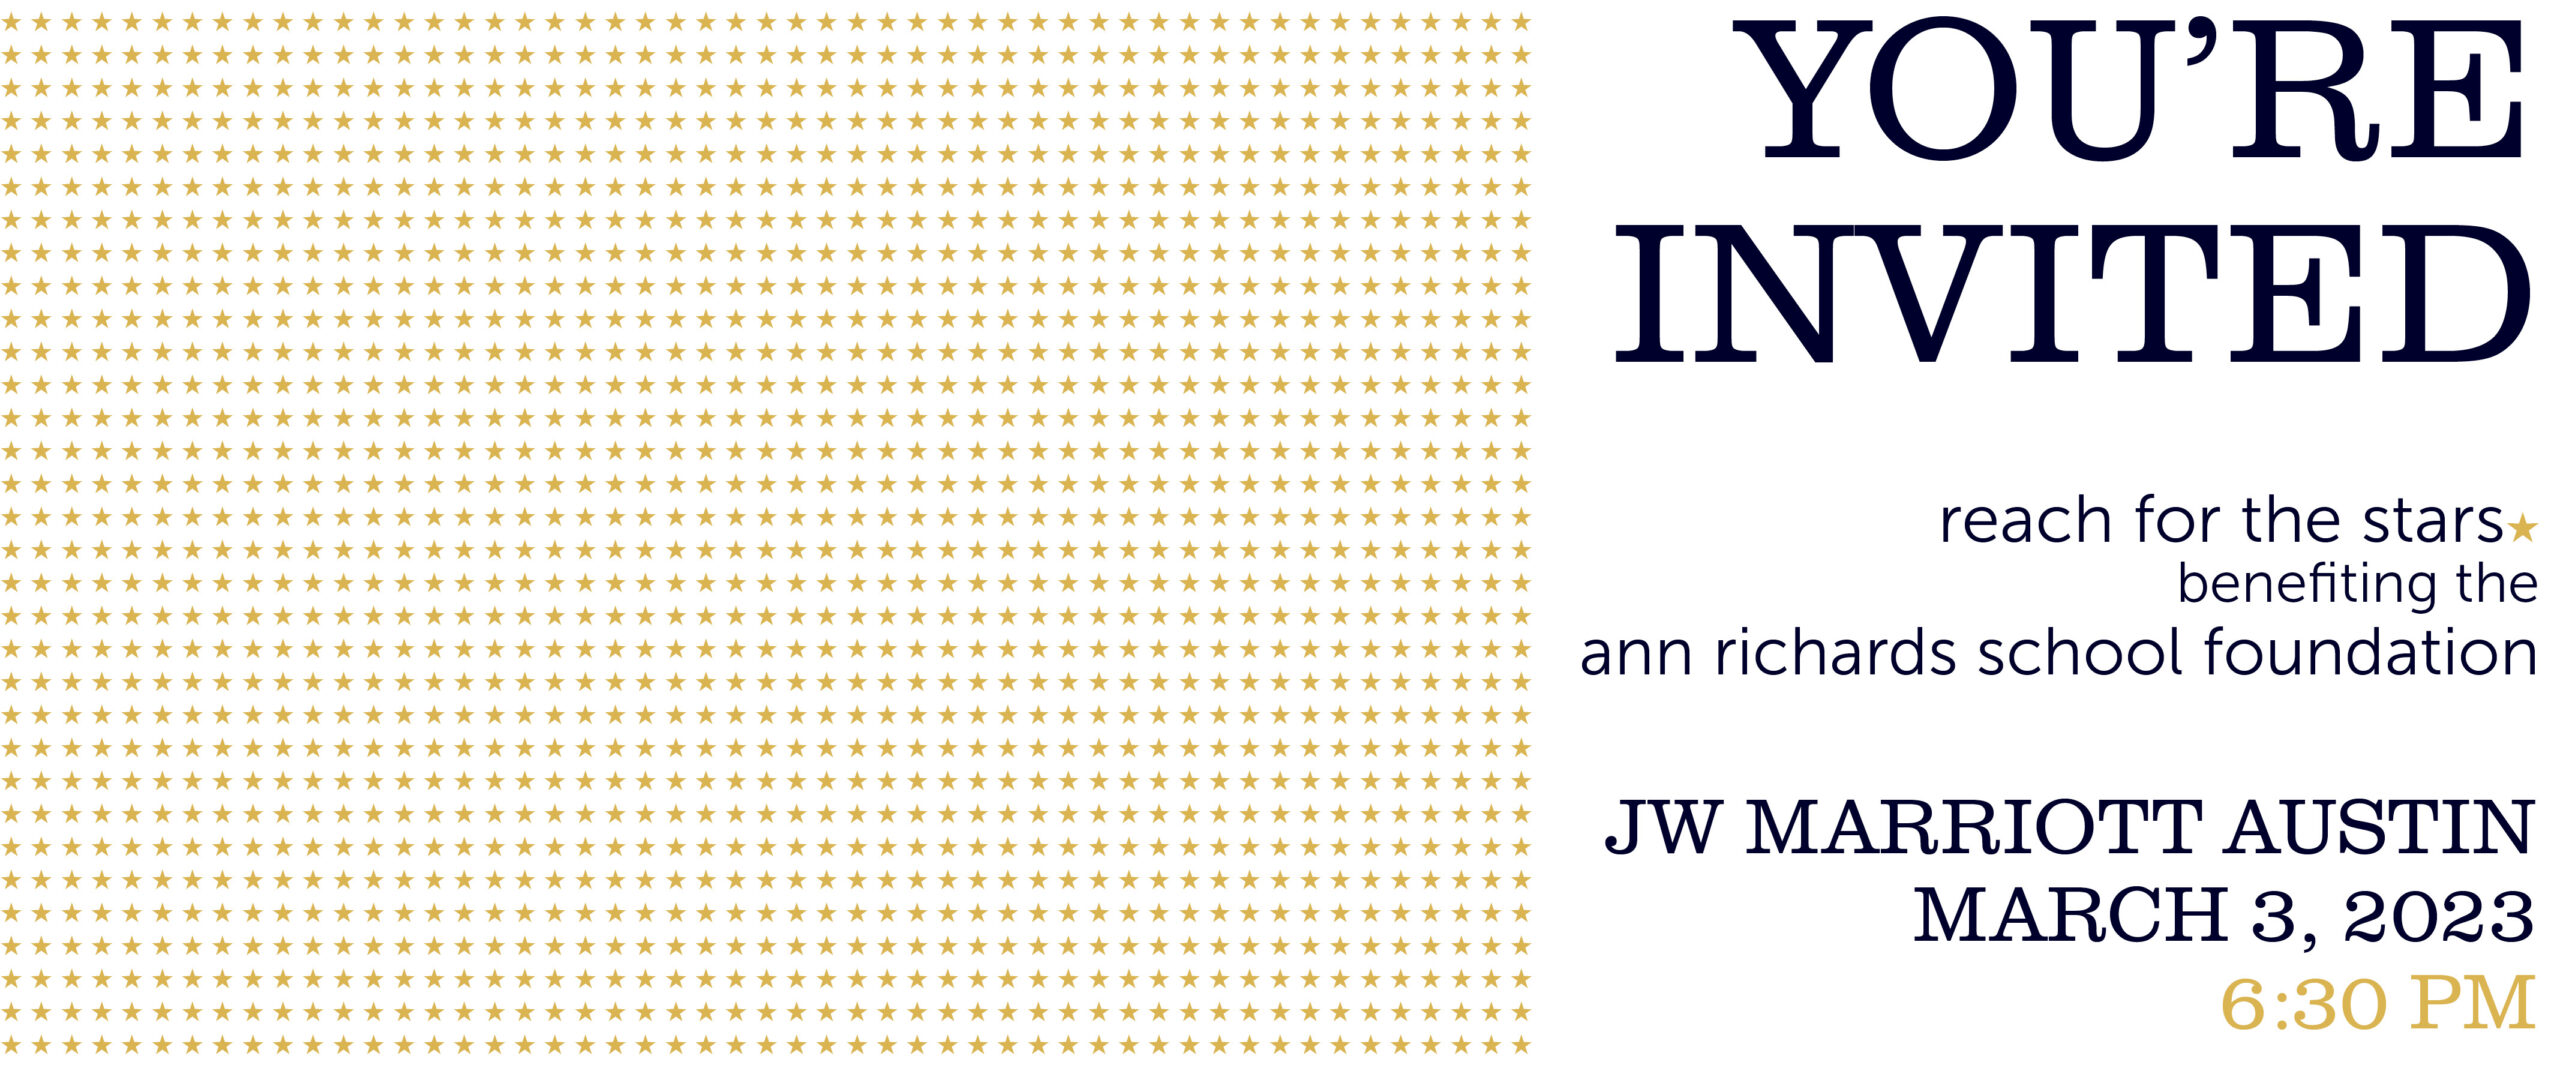 You're invited to Reach for the Stars on March 3, 2023 at the JW Marriott Austin at 6:30 PM.